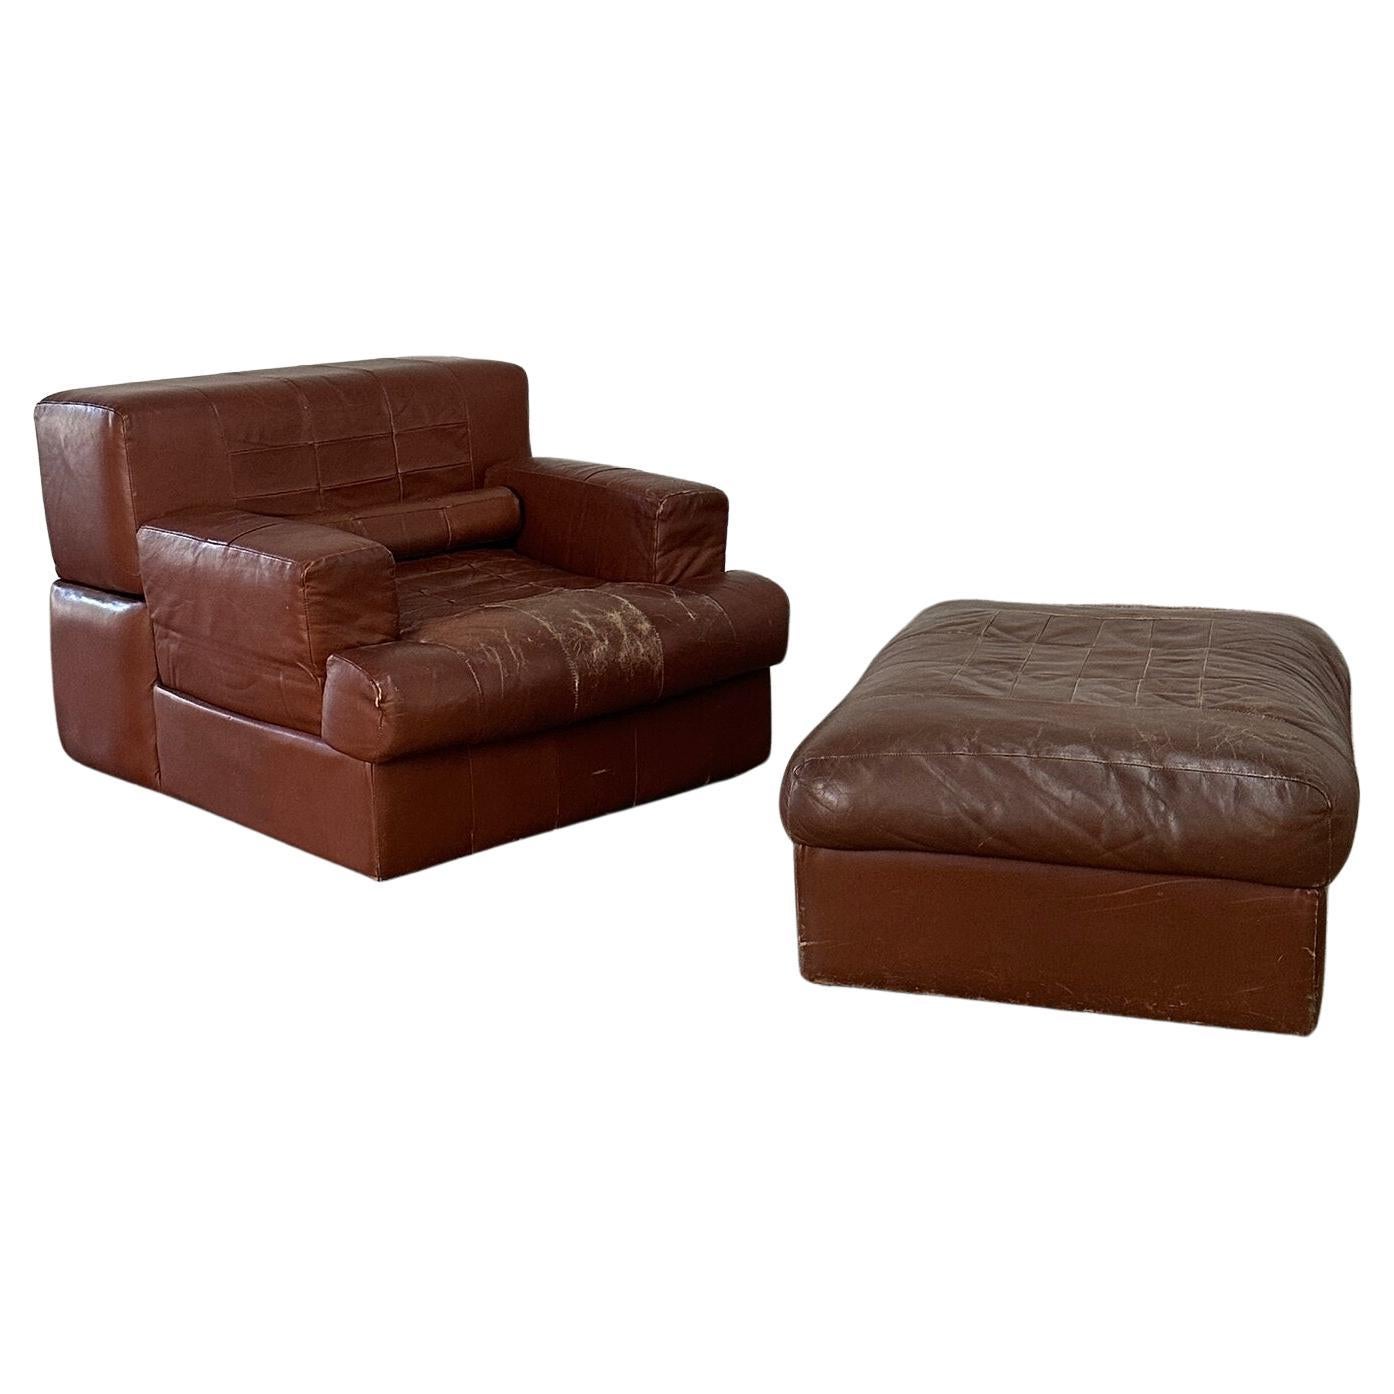 Ajustable Percival Lafer lounge chair and ottoman